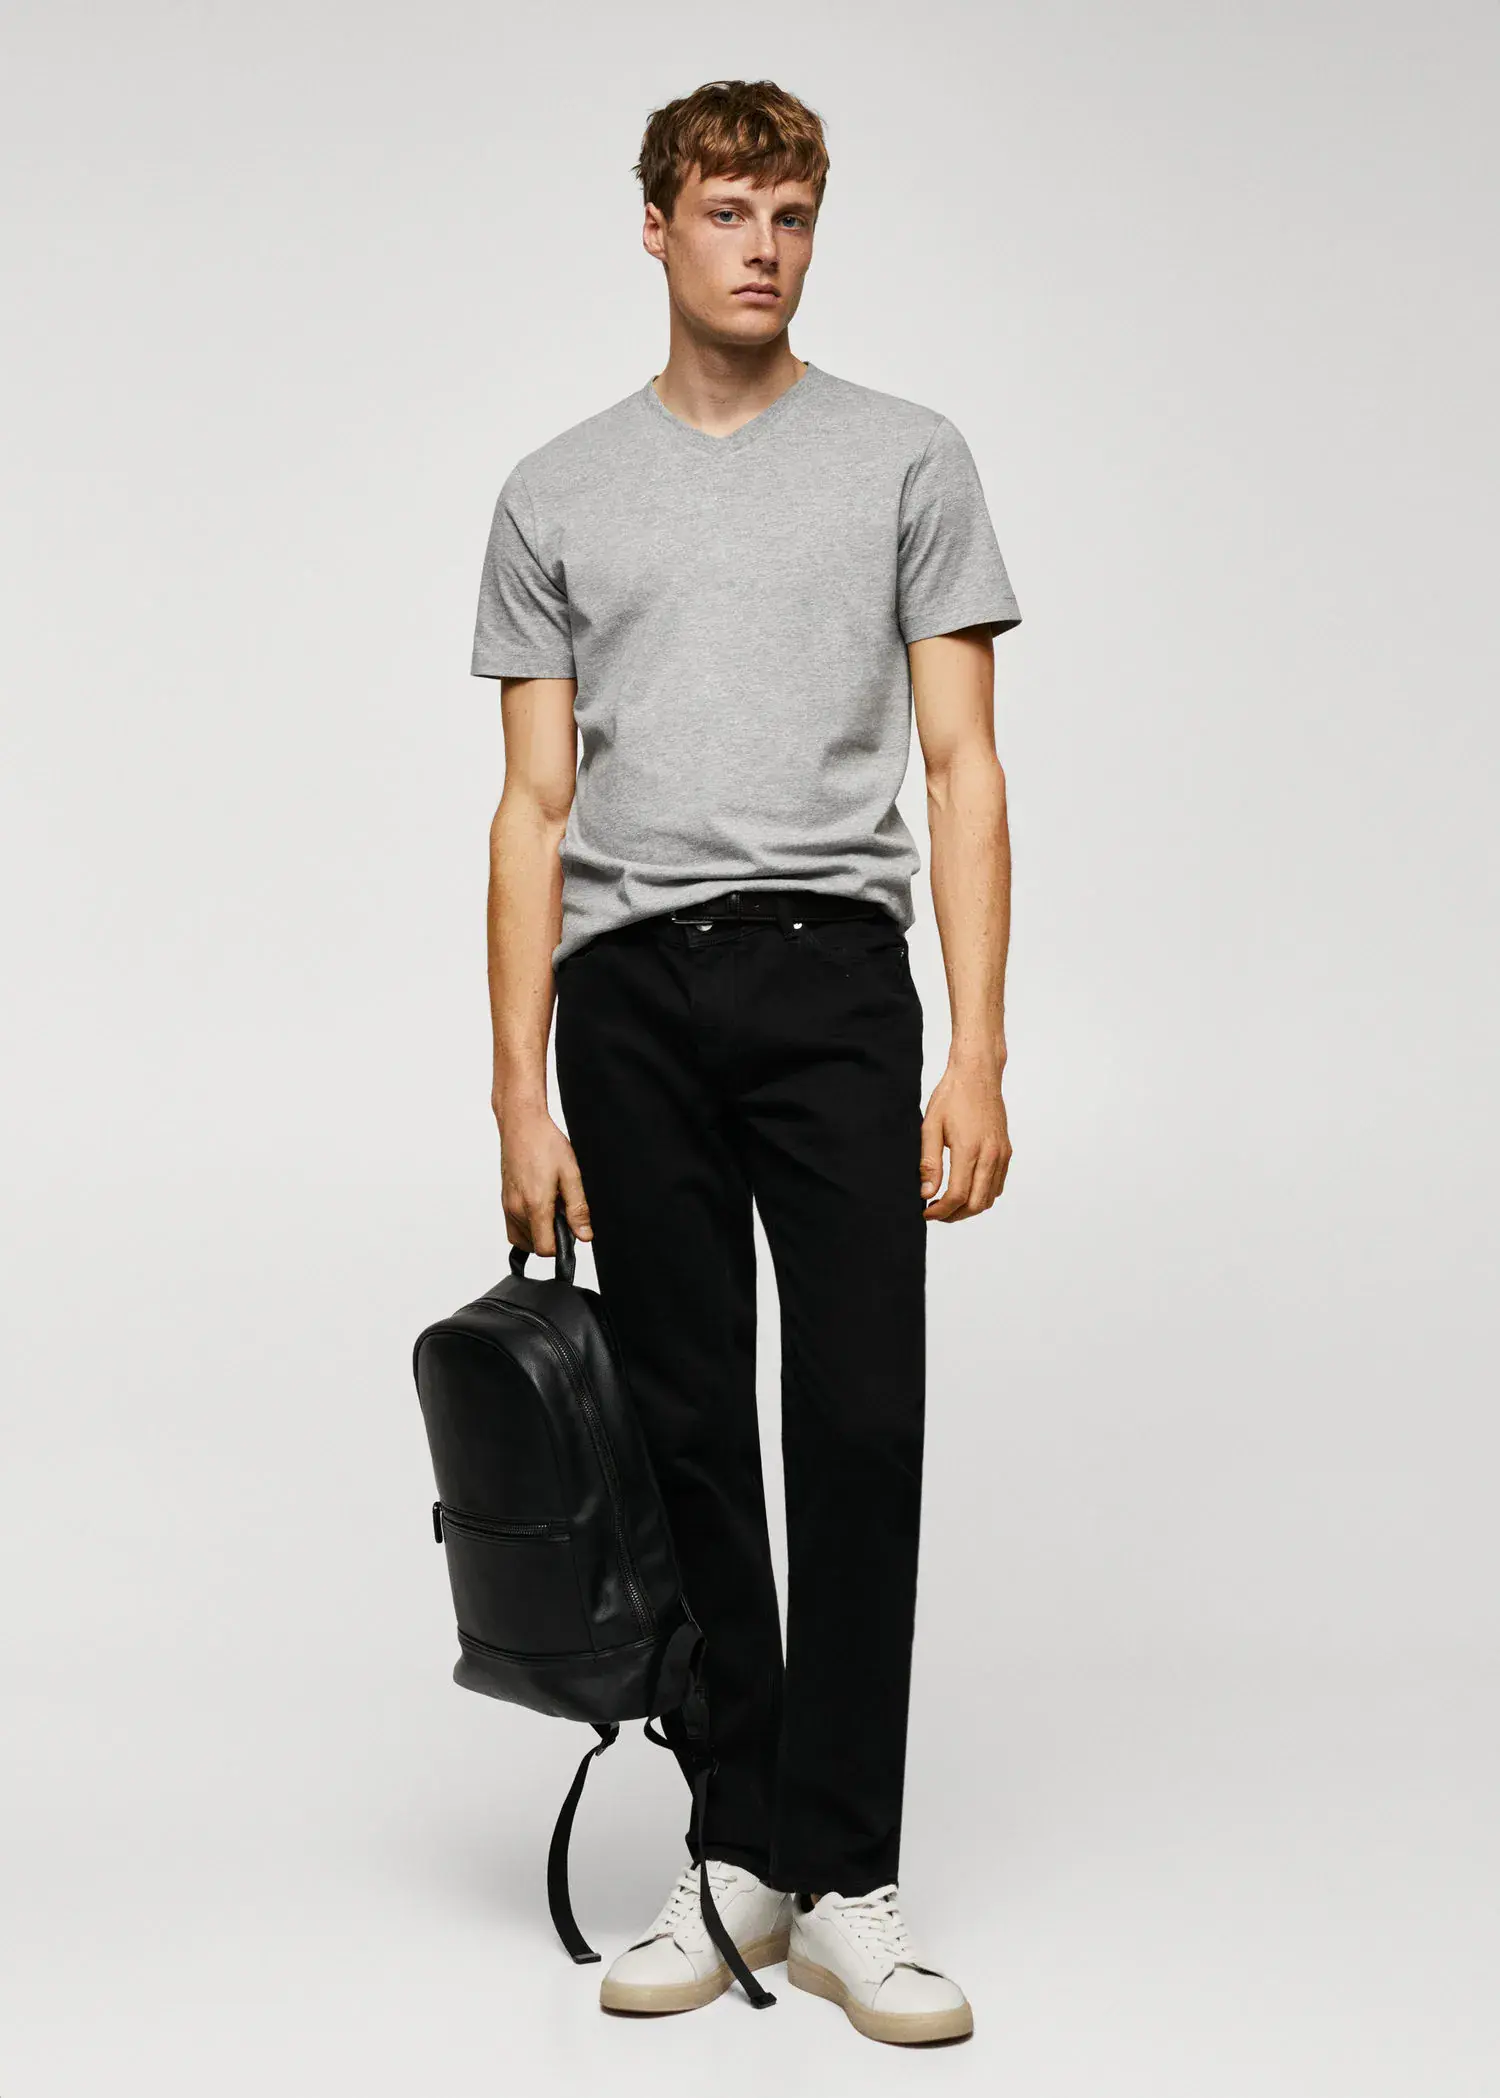 Mango Basic cotton V-neck T-shirt. a young man holding a backpack in front of a white wall. 